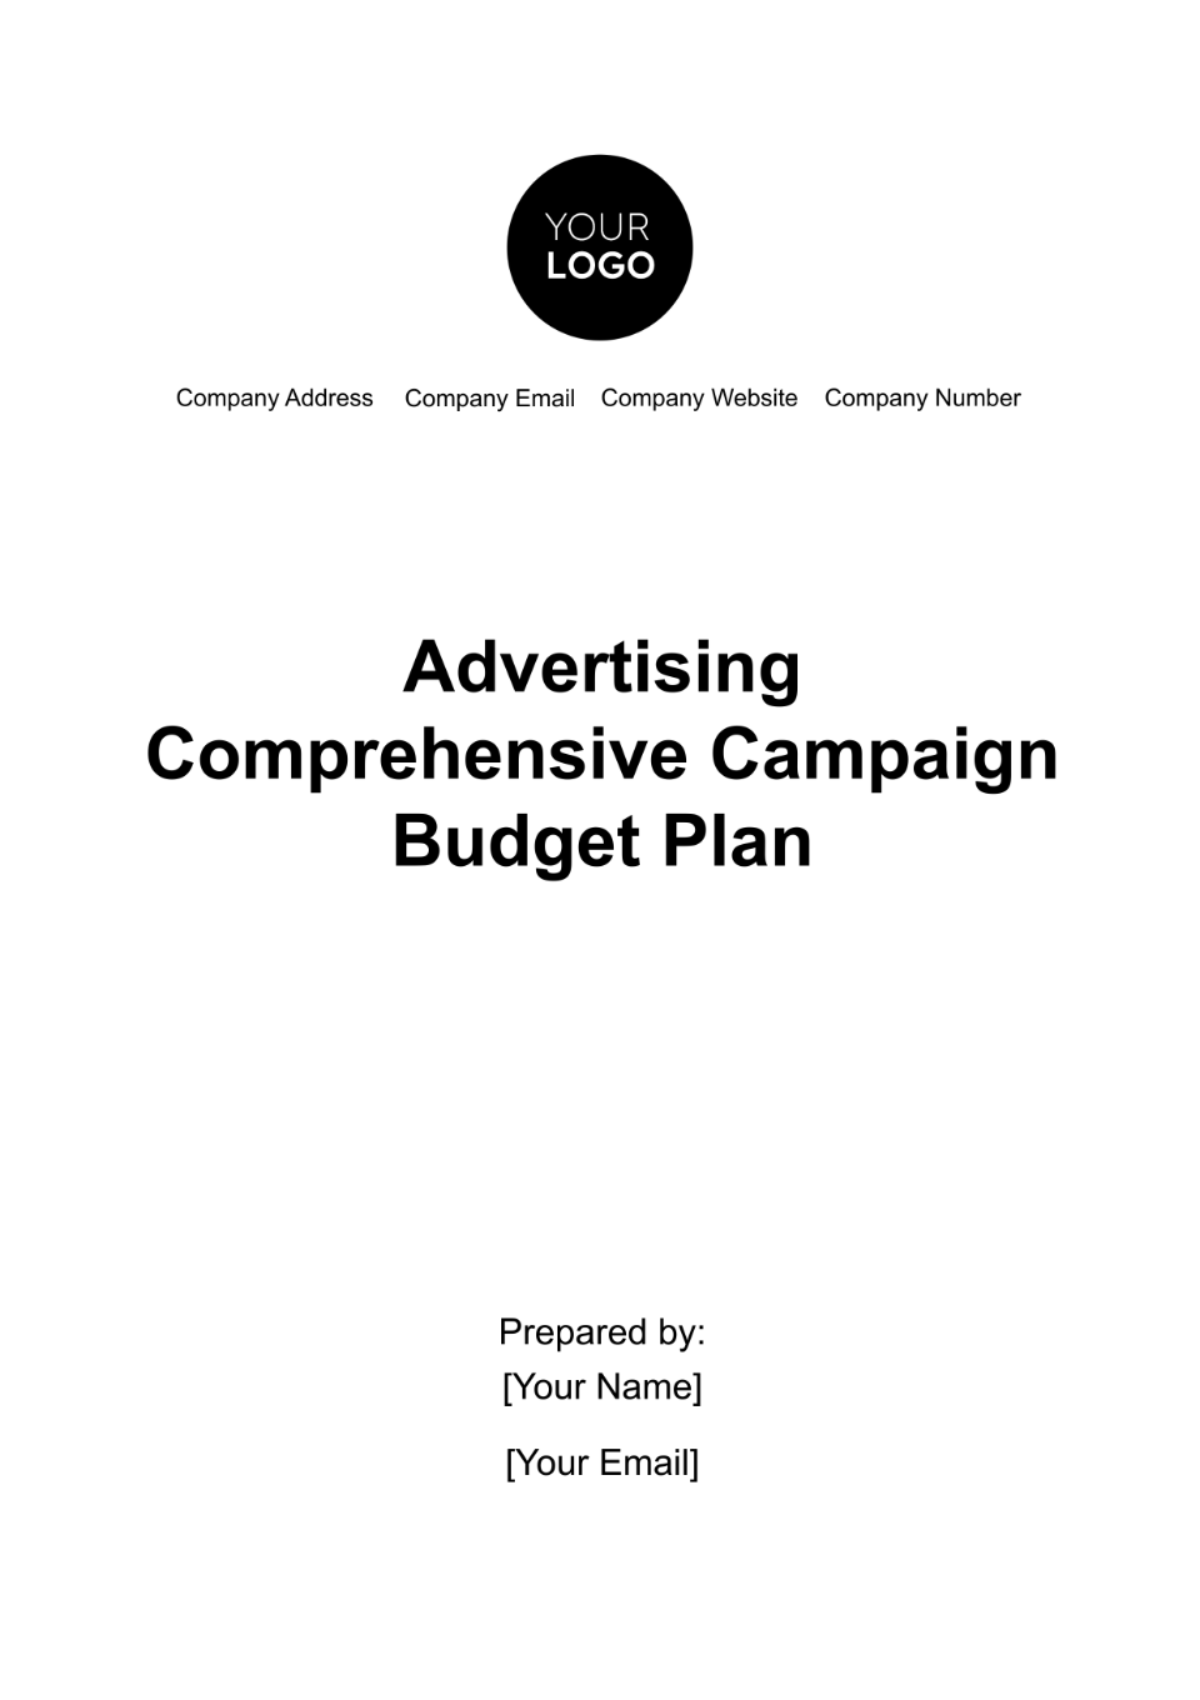 Advertising Comprehensive Campaign Budget Plan Template